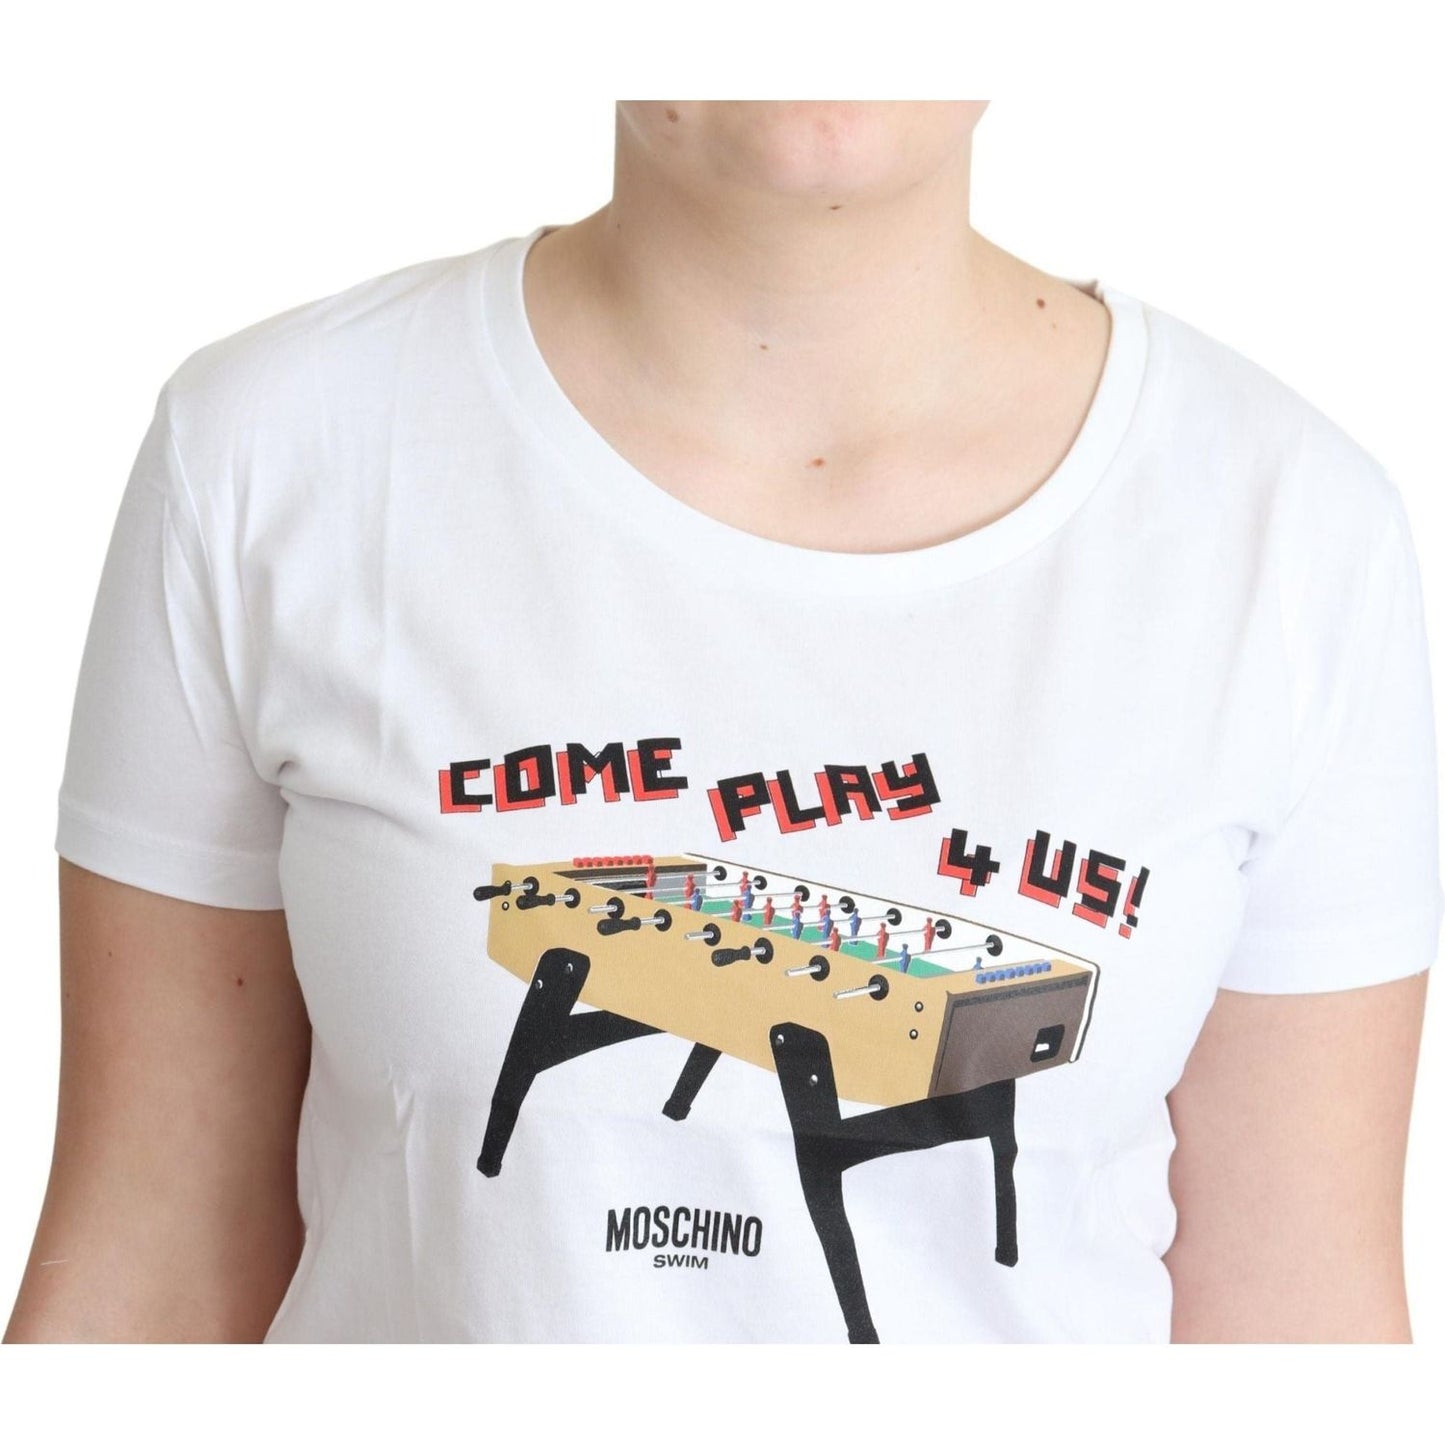 Moschino Chic Cotton Round Neck Tee with Playful Print white-cotton-come-play-4-us-print-tops-t-shirt IMG_0965-1-scaled-4467f5df-51a.jpg